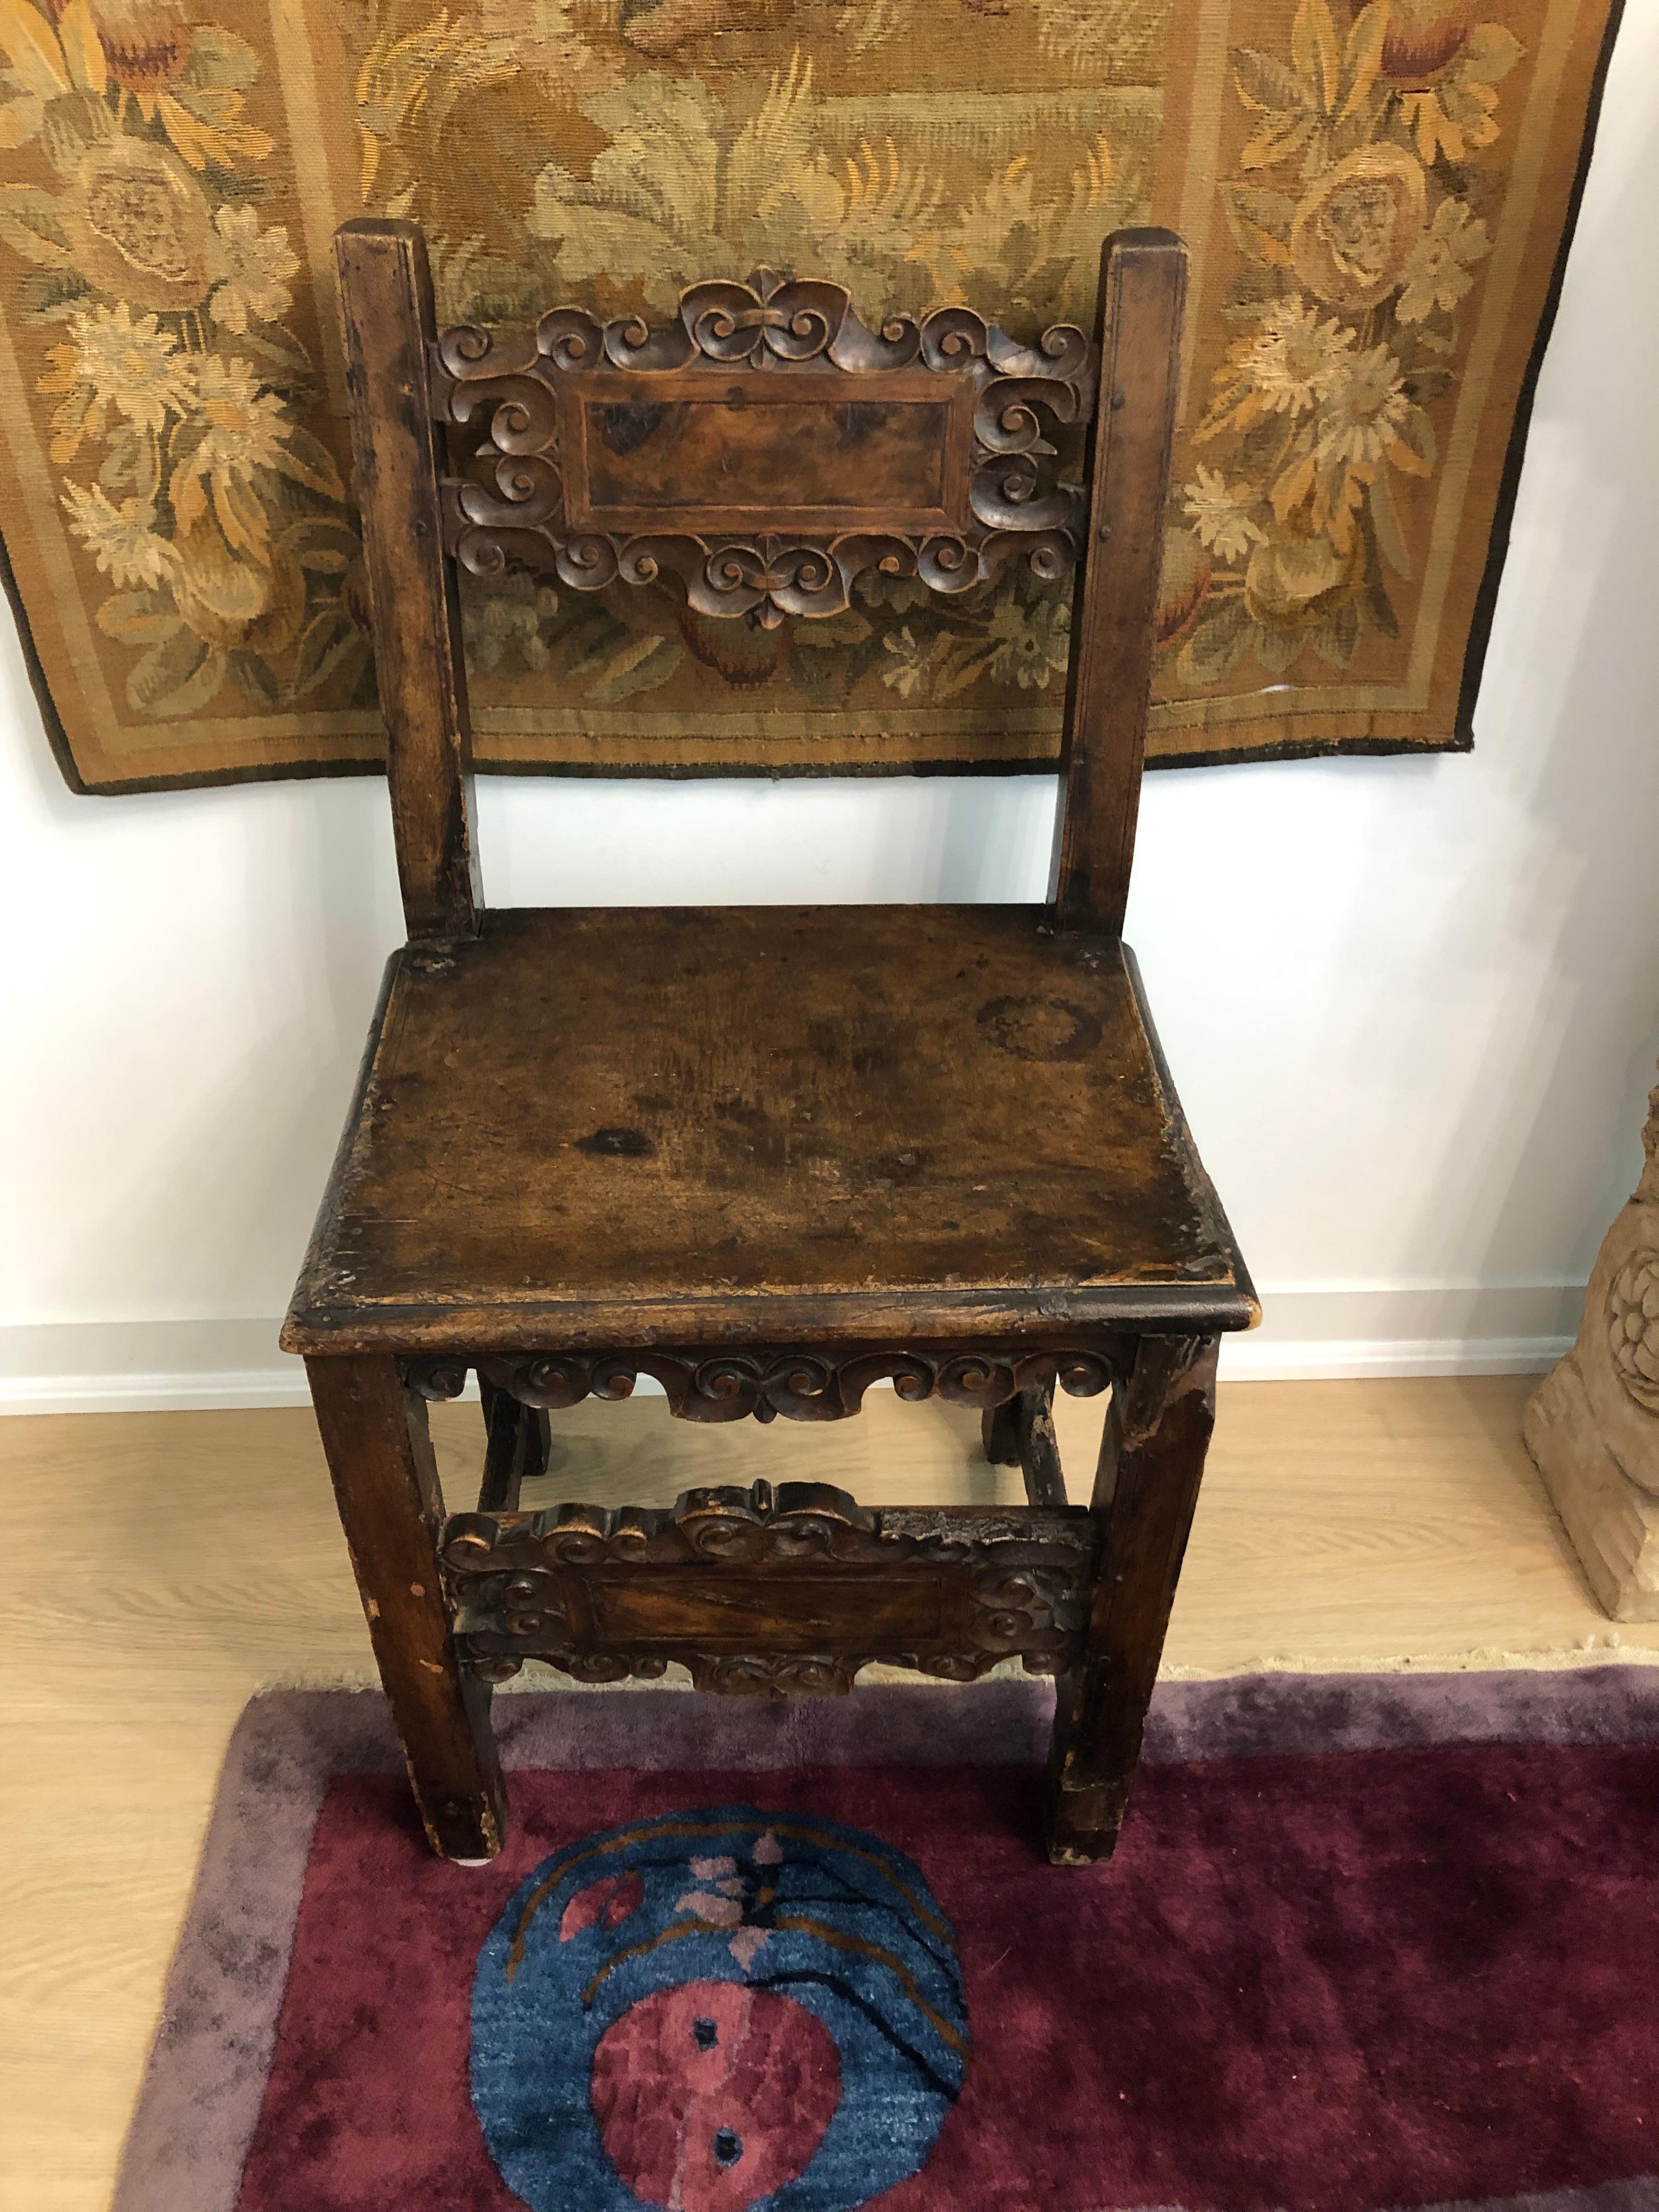 This is a wonderful and very old Spanish chair, made of carved walnut. Possibly 17th century.
The shape is typical of 17th century Spanish chairs. The back and front rail each sporting a cartouche design with scrolled borders.
Beautiful patina. The